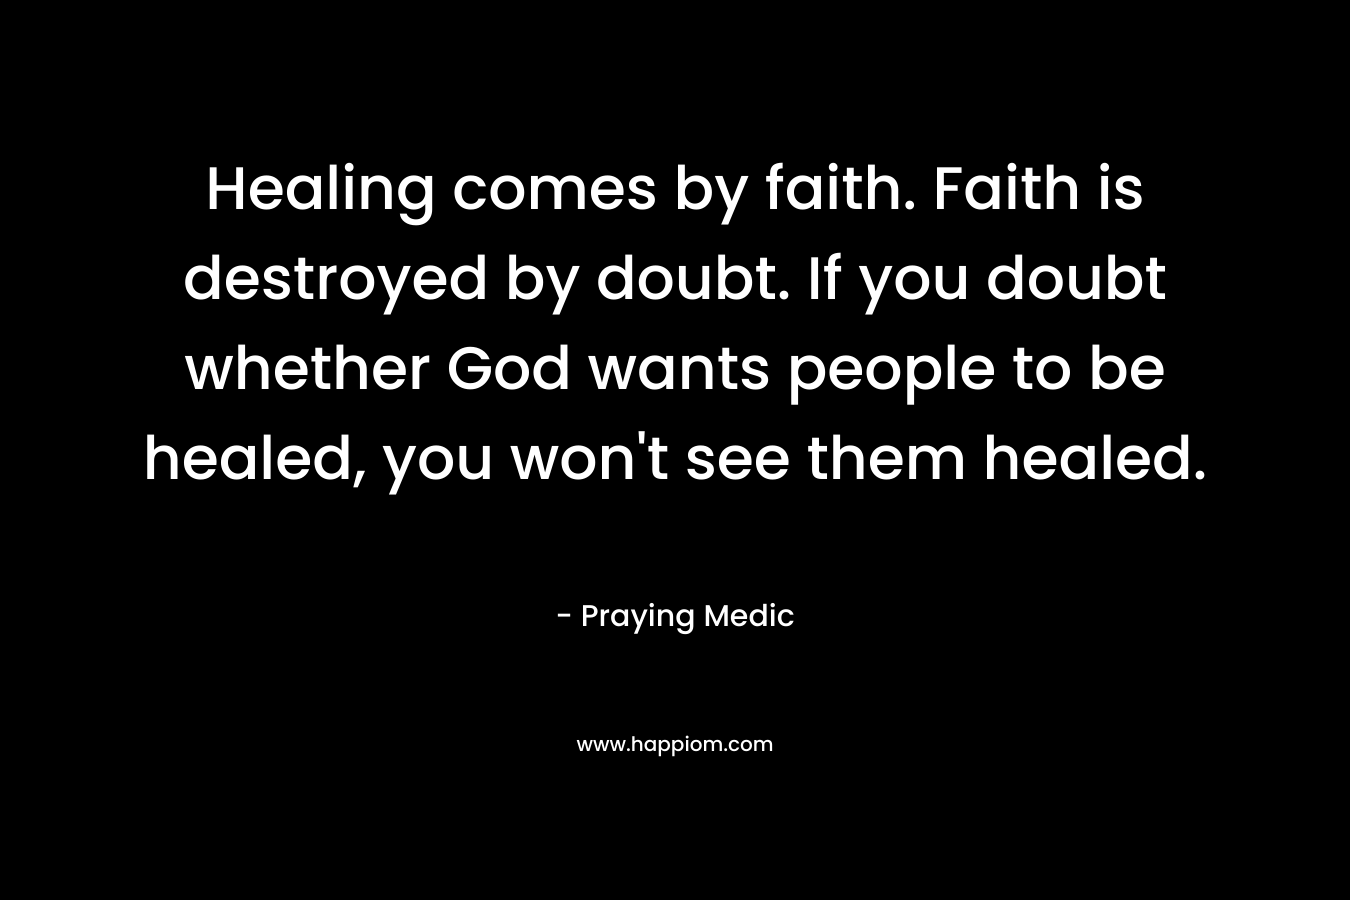 Healing comes by faith. Faith is destroyed by doubt. If you doubt whether God wants people to be healed, you won’t see them healed. – Praying Medic